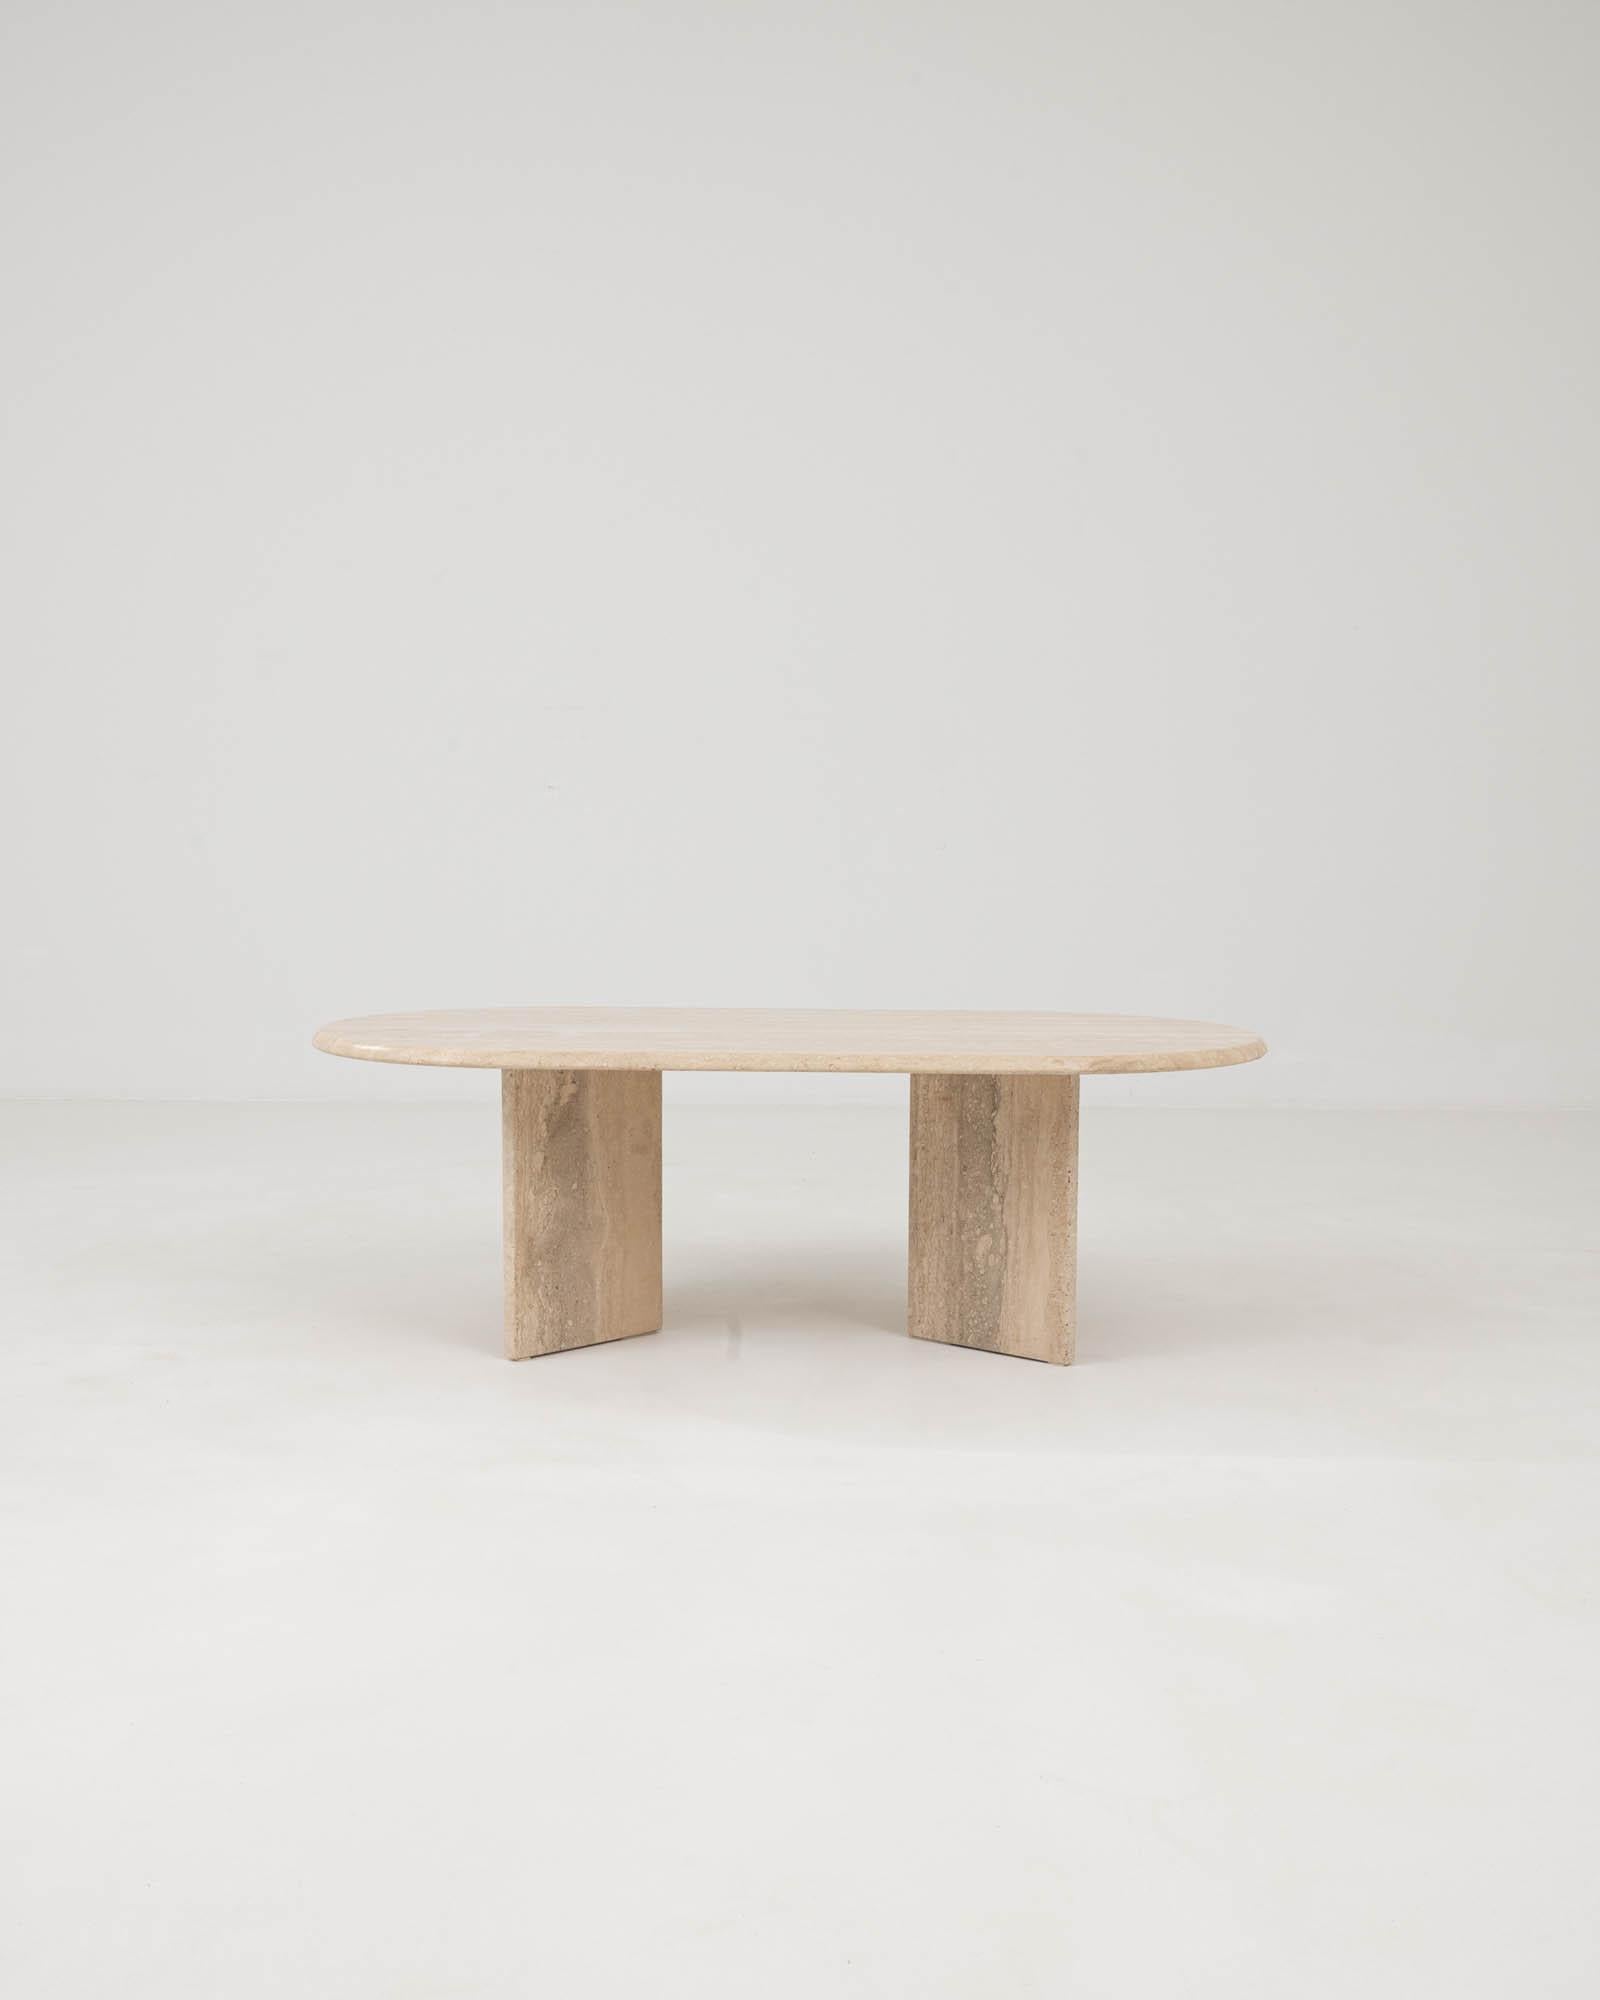 The formal simplicity and rich materiality of this travertine marble coffee table create an impression of minimalist elegance. Made in Italy in the 1970s, a rectangular table top gently rests on opposing low rectangles of stone. The warm neutral